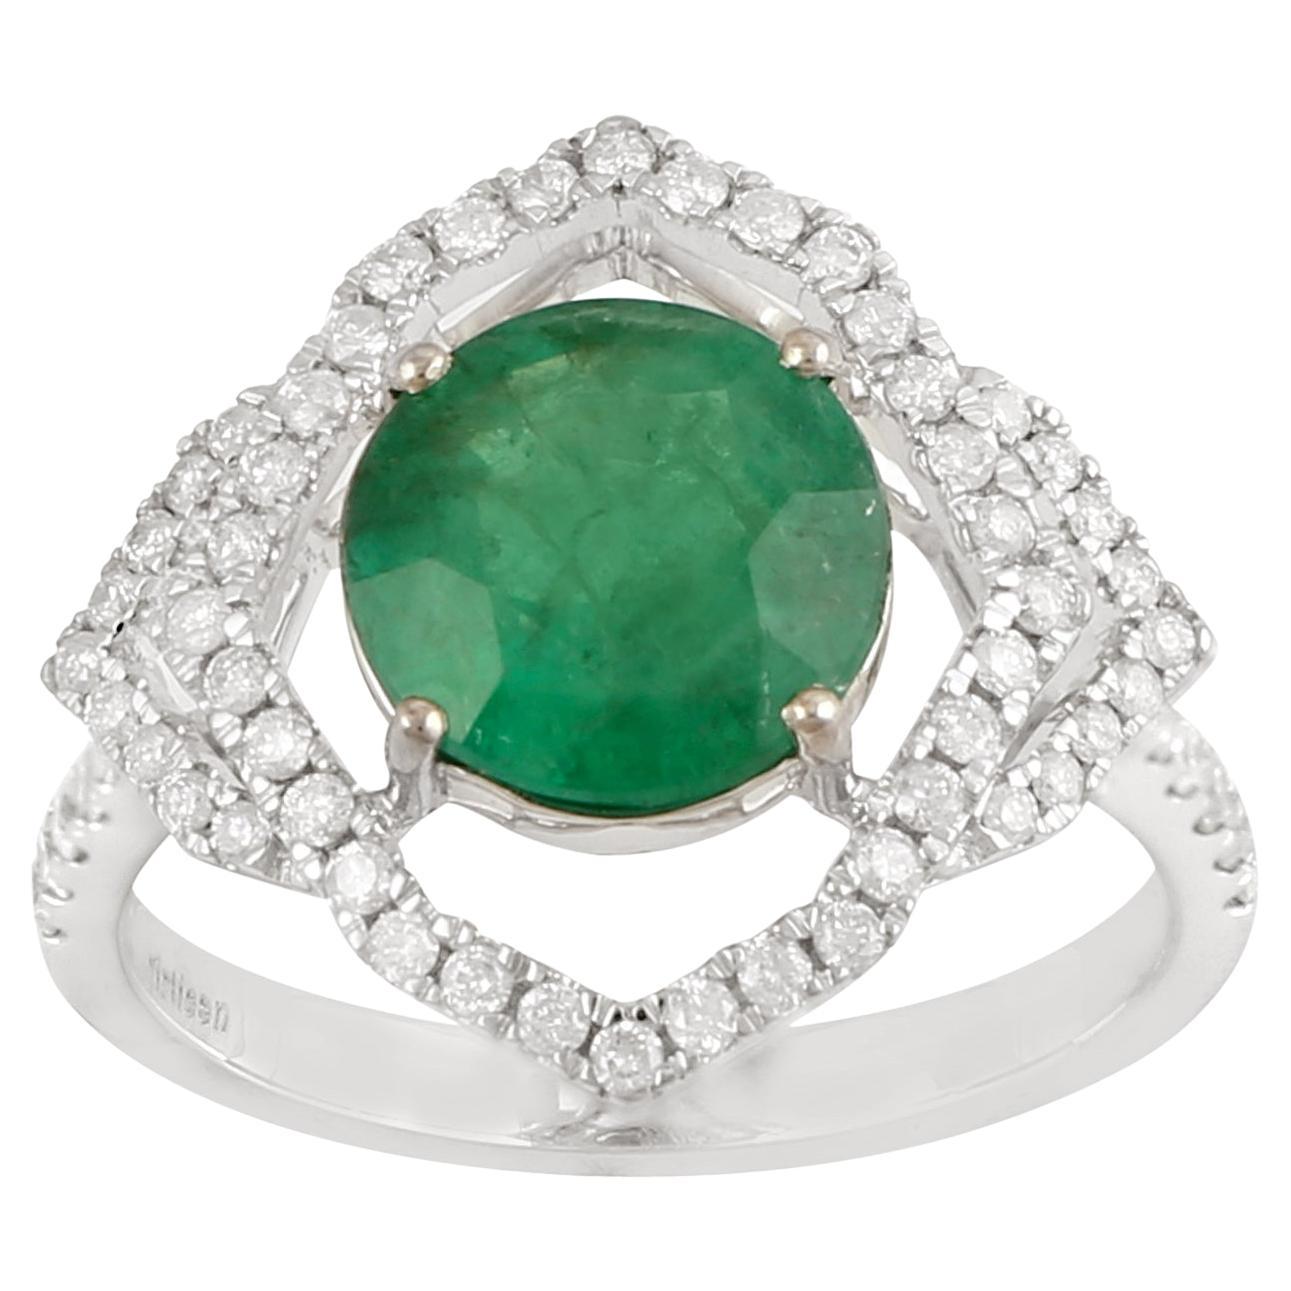 Natural Emerald Cocktail Ring With Halo Diamonds Made In 18K White Gold For Sale